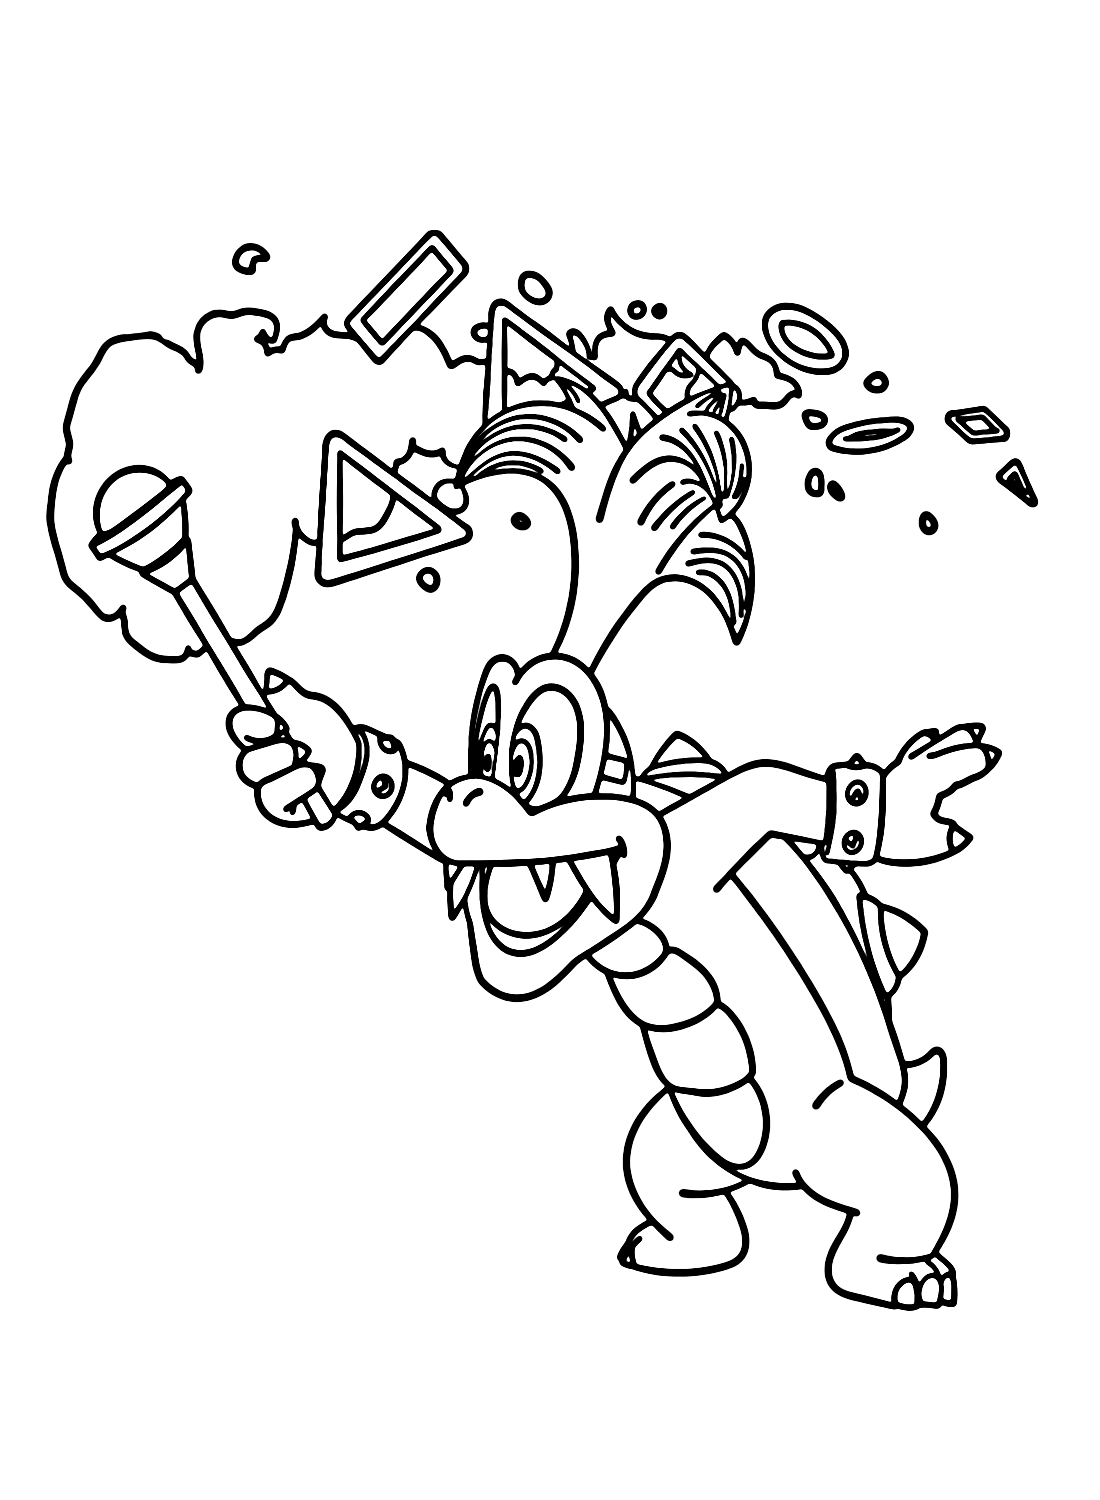 Iggy of Koopalings Coloring Pages